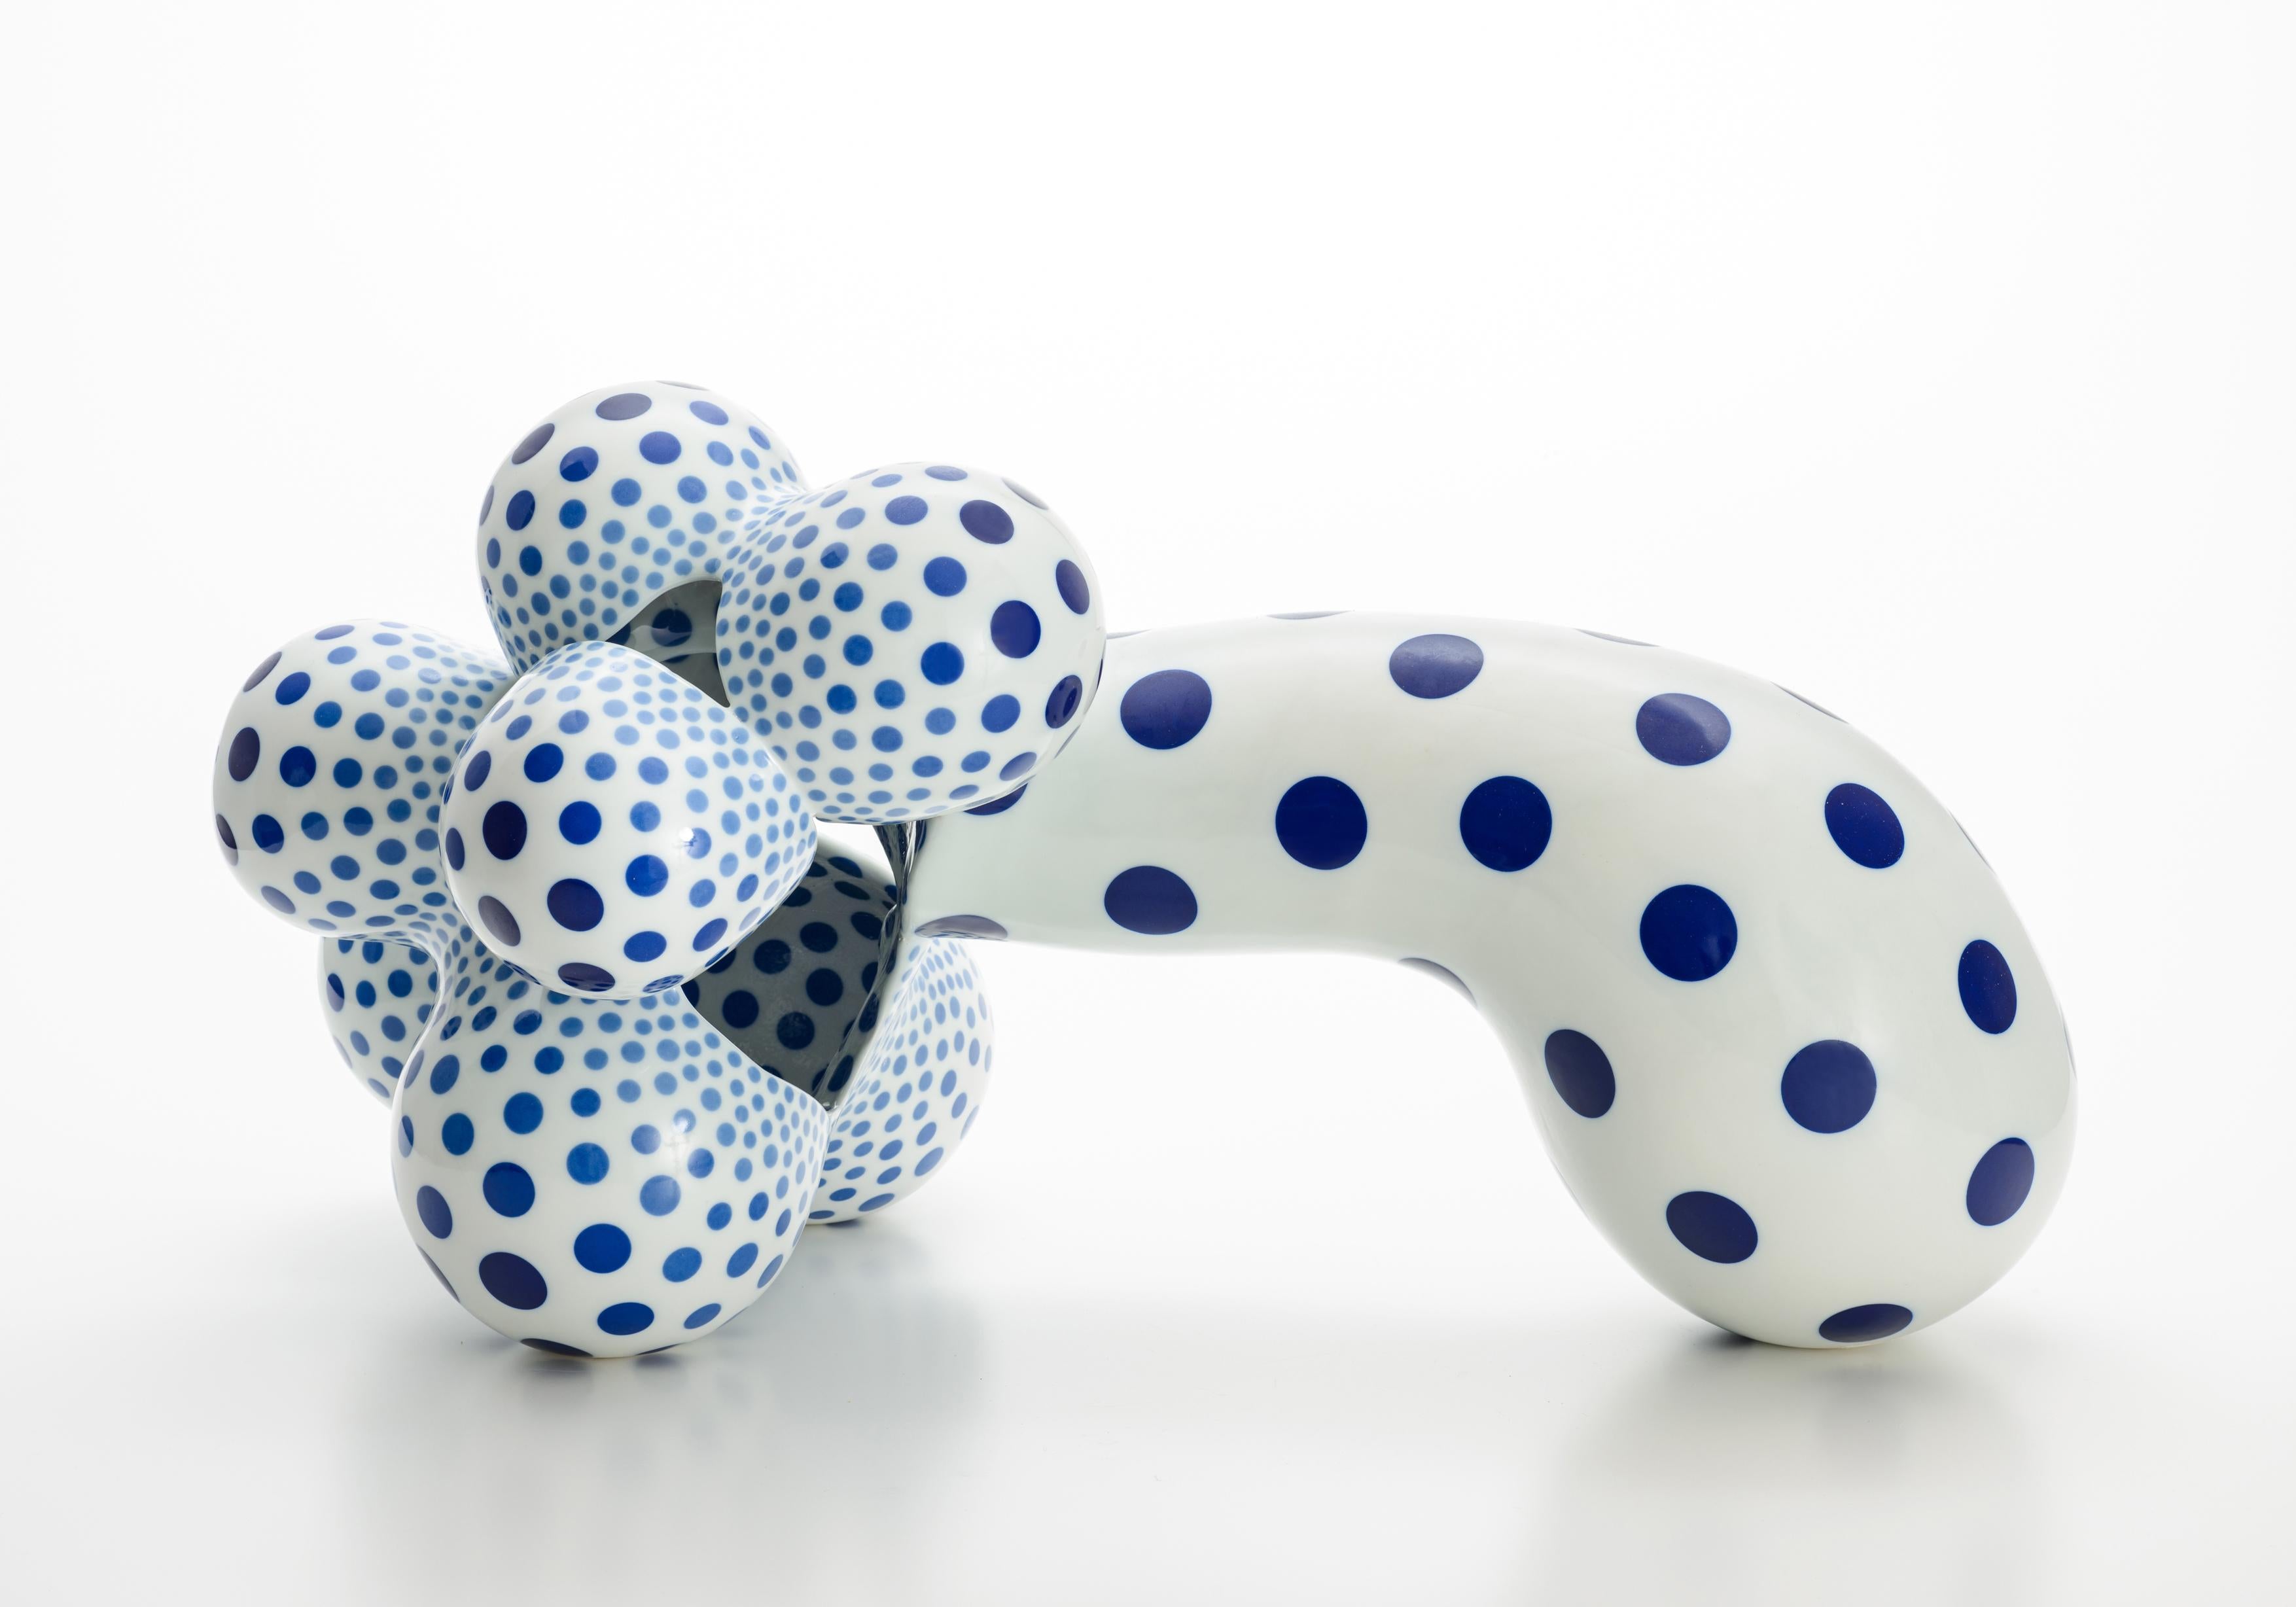 Harumi Nakashima Abstract Sculpture - "A Disclosing Form 1810", Abstract Ceramic Sculpture, Dynamic Porcelain Form